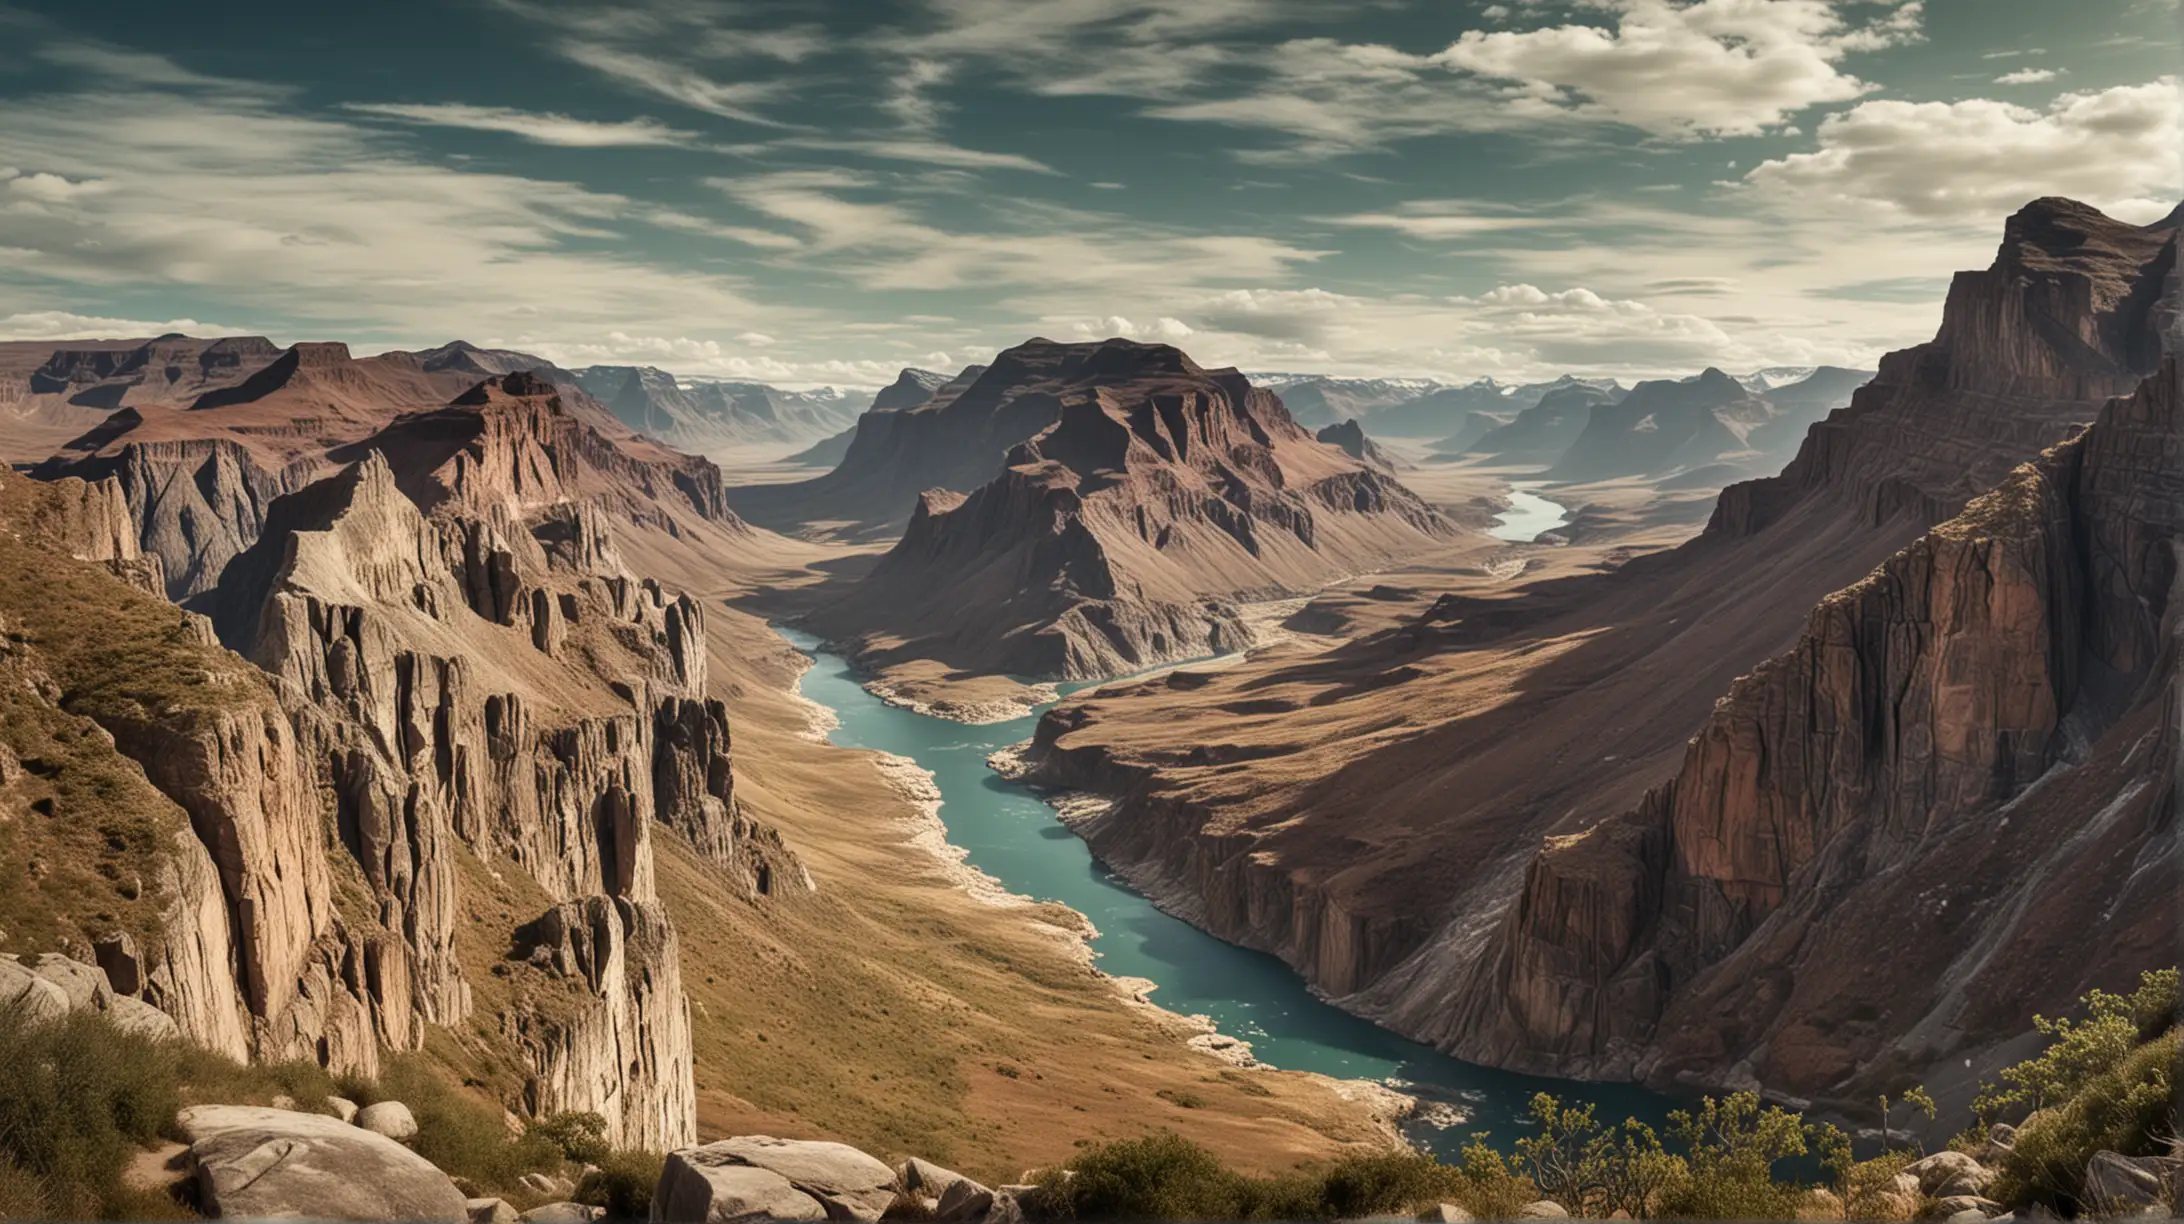 Panoramic Landscape from Greenland to the Grand Canyon Photography Journey